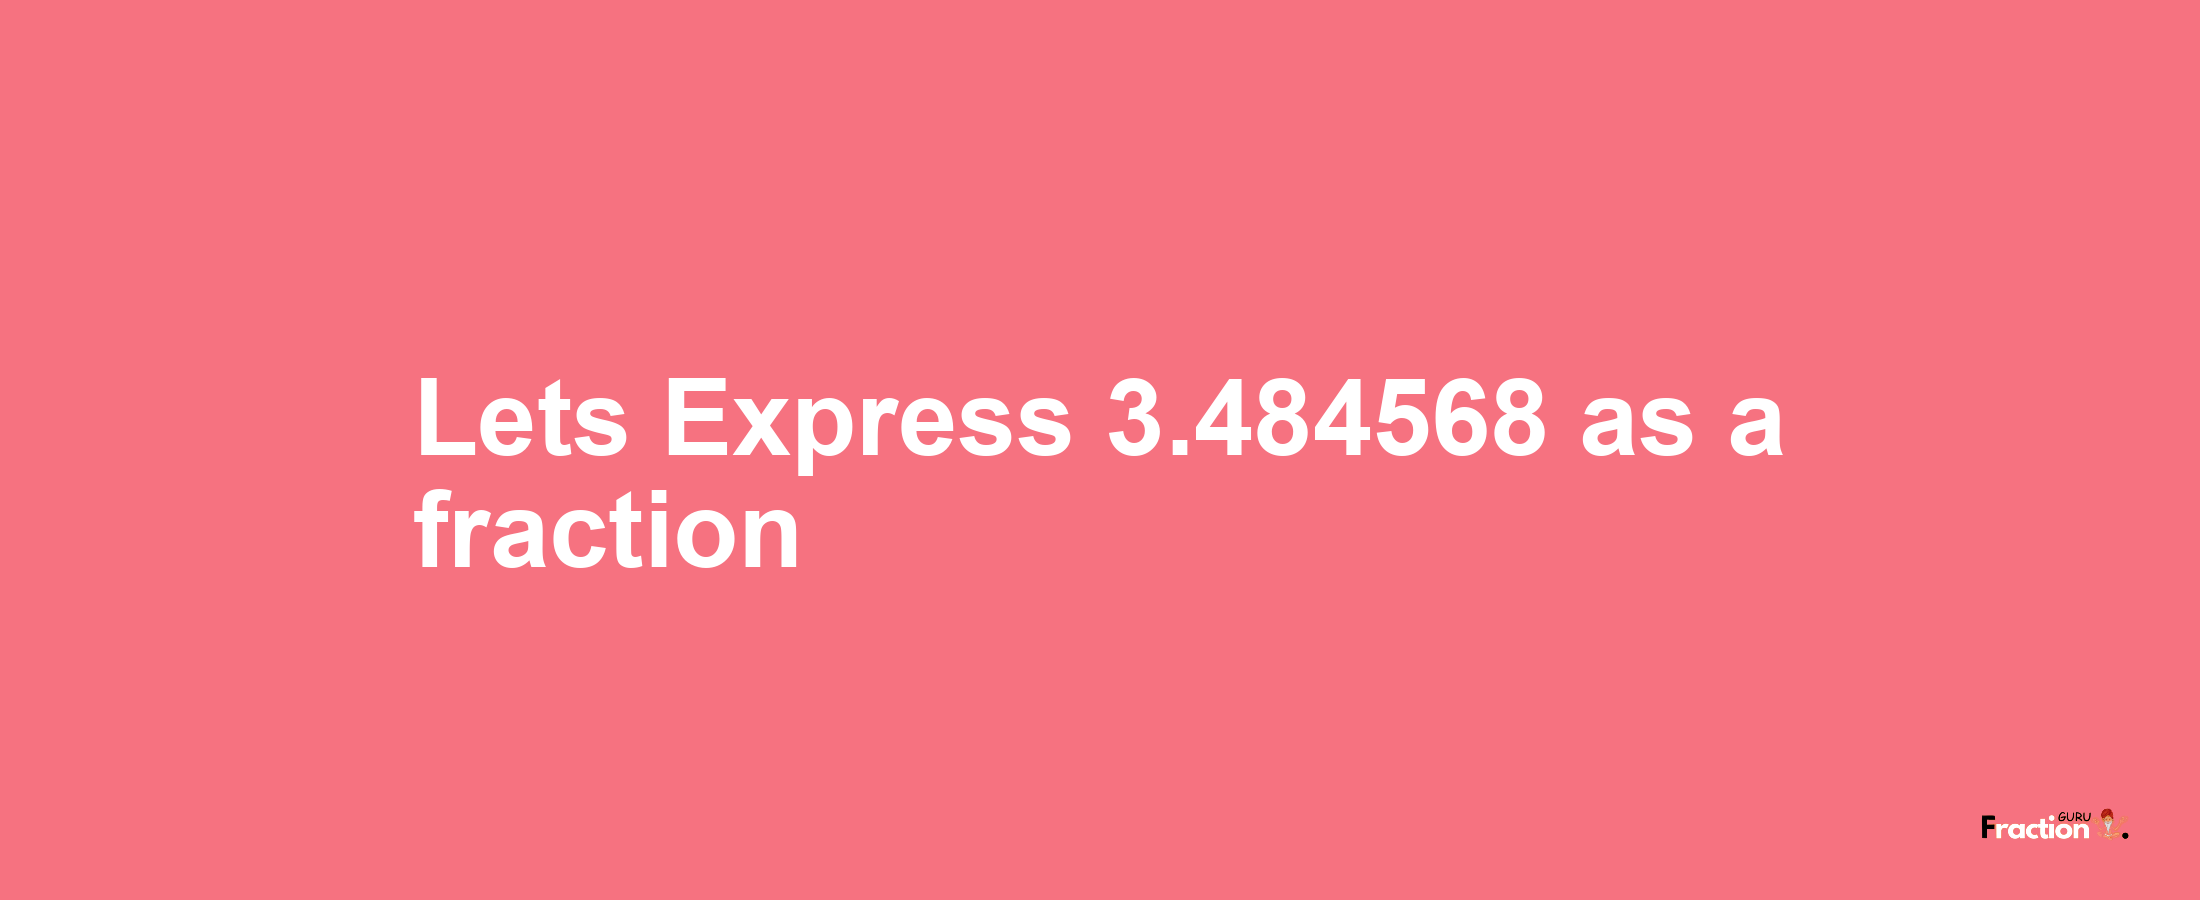 Lets Express 3.484568 as afraction